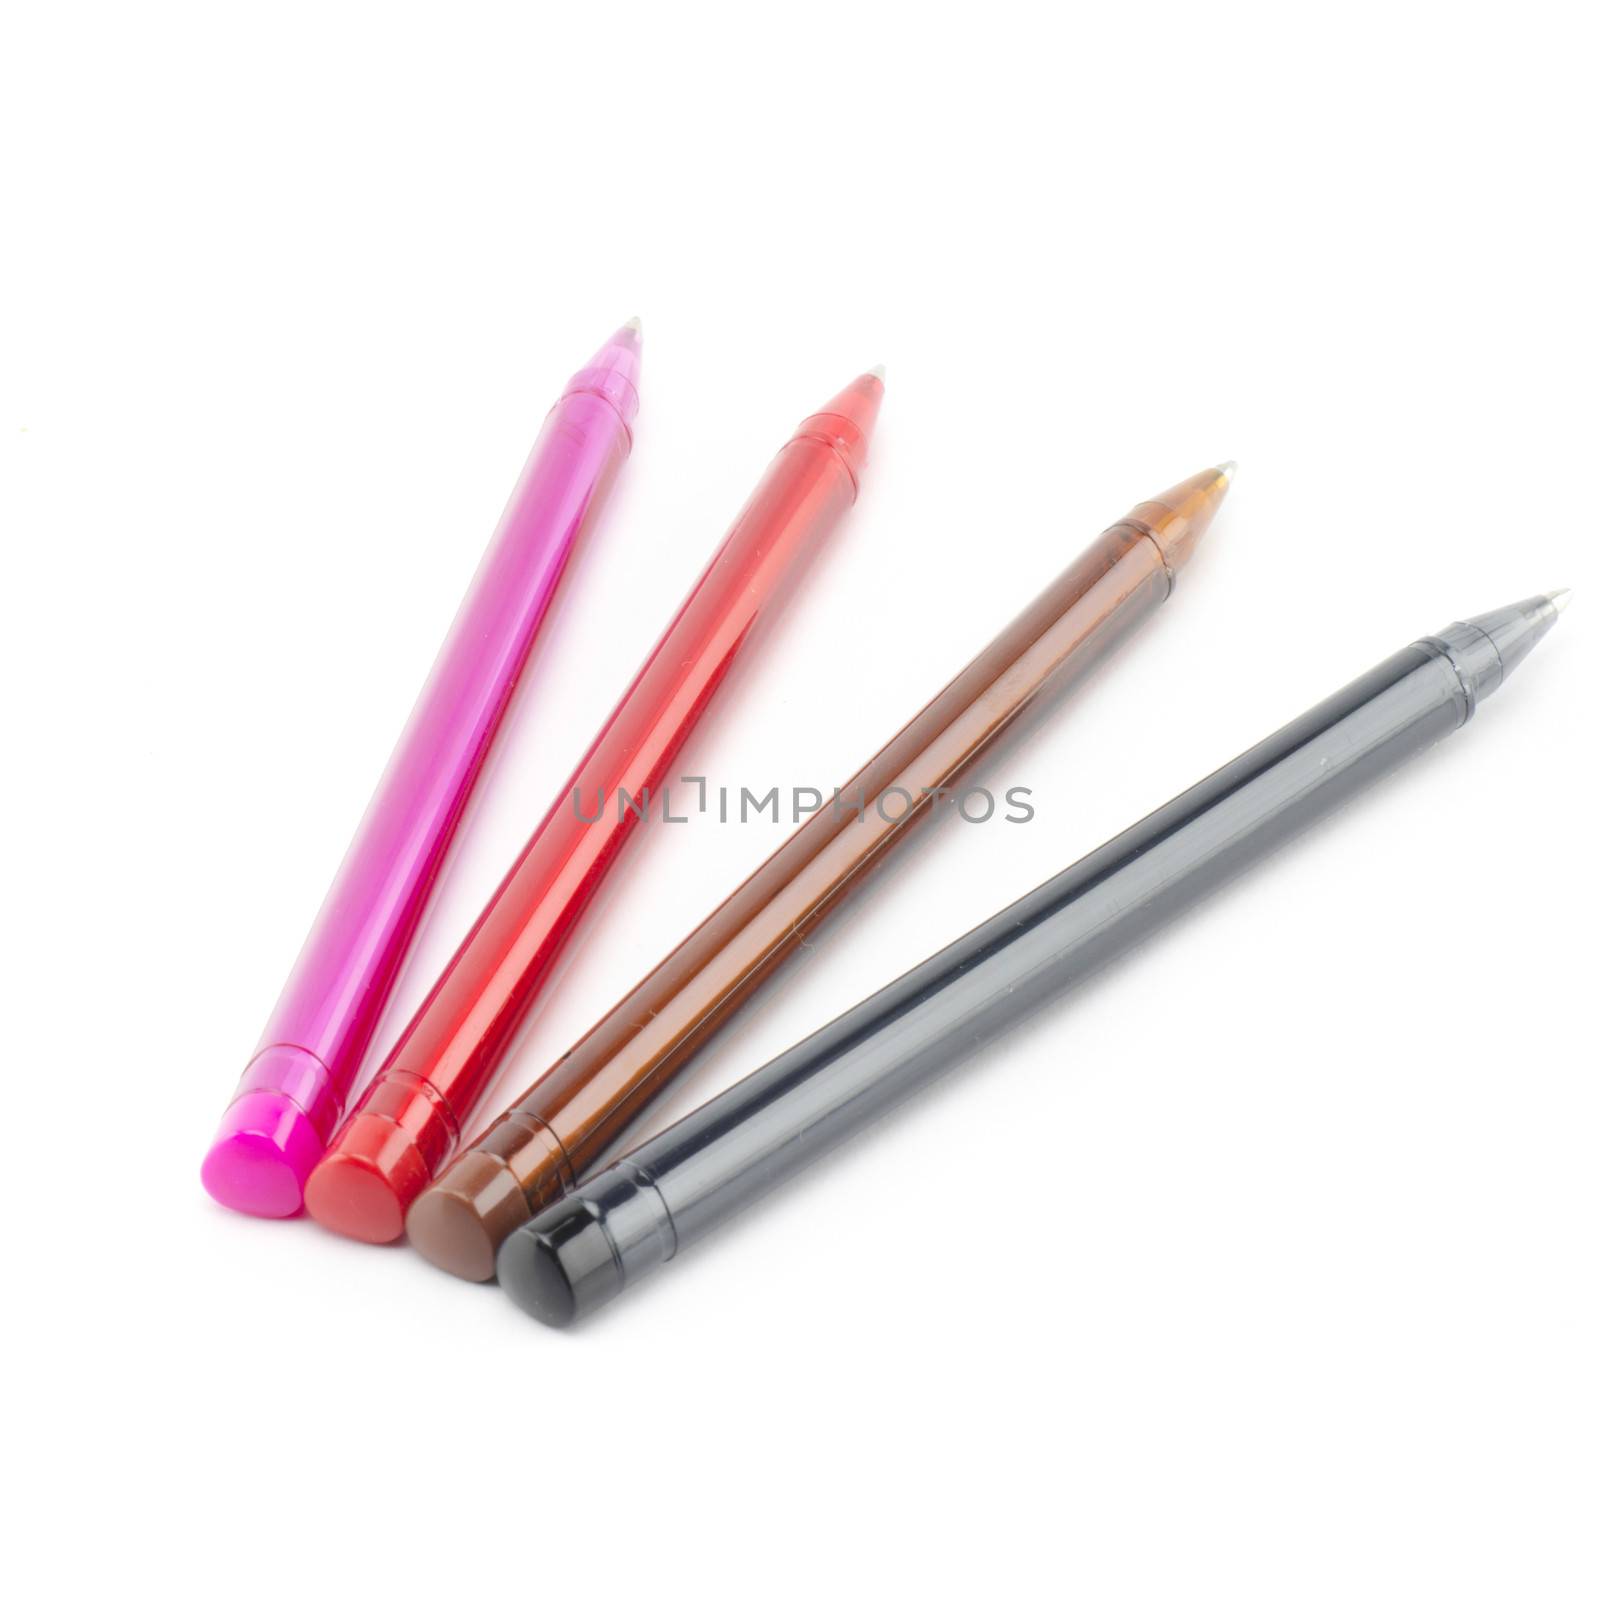 colorful pens isolated on white by ammza12